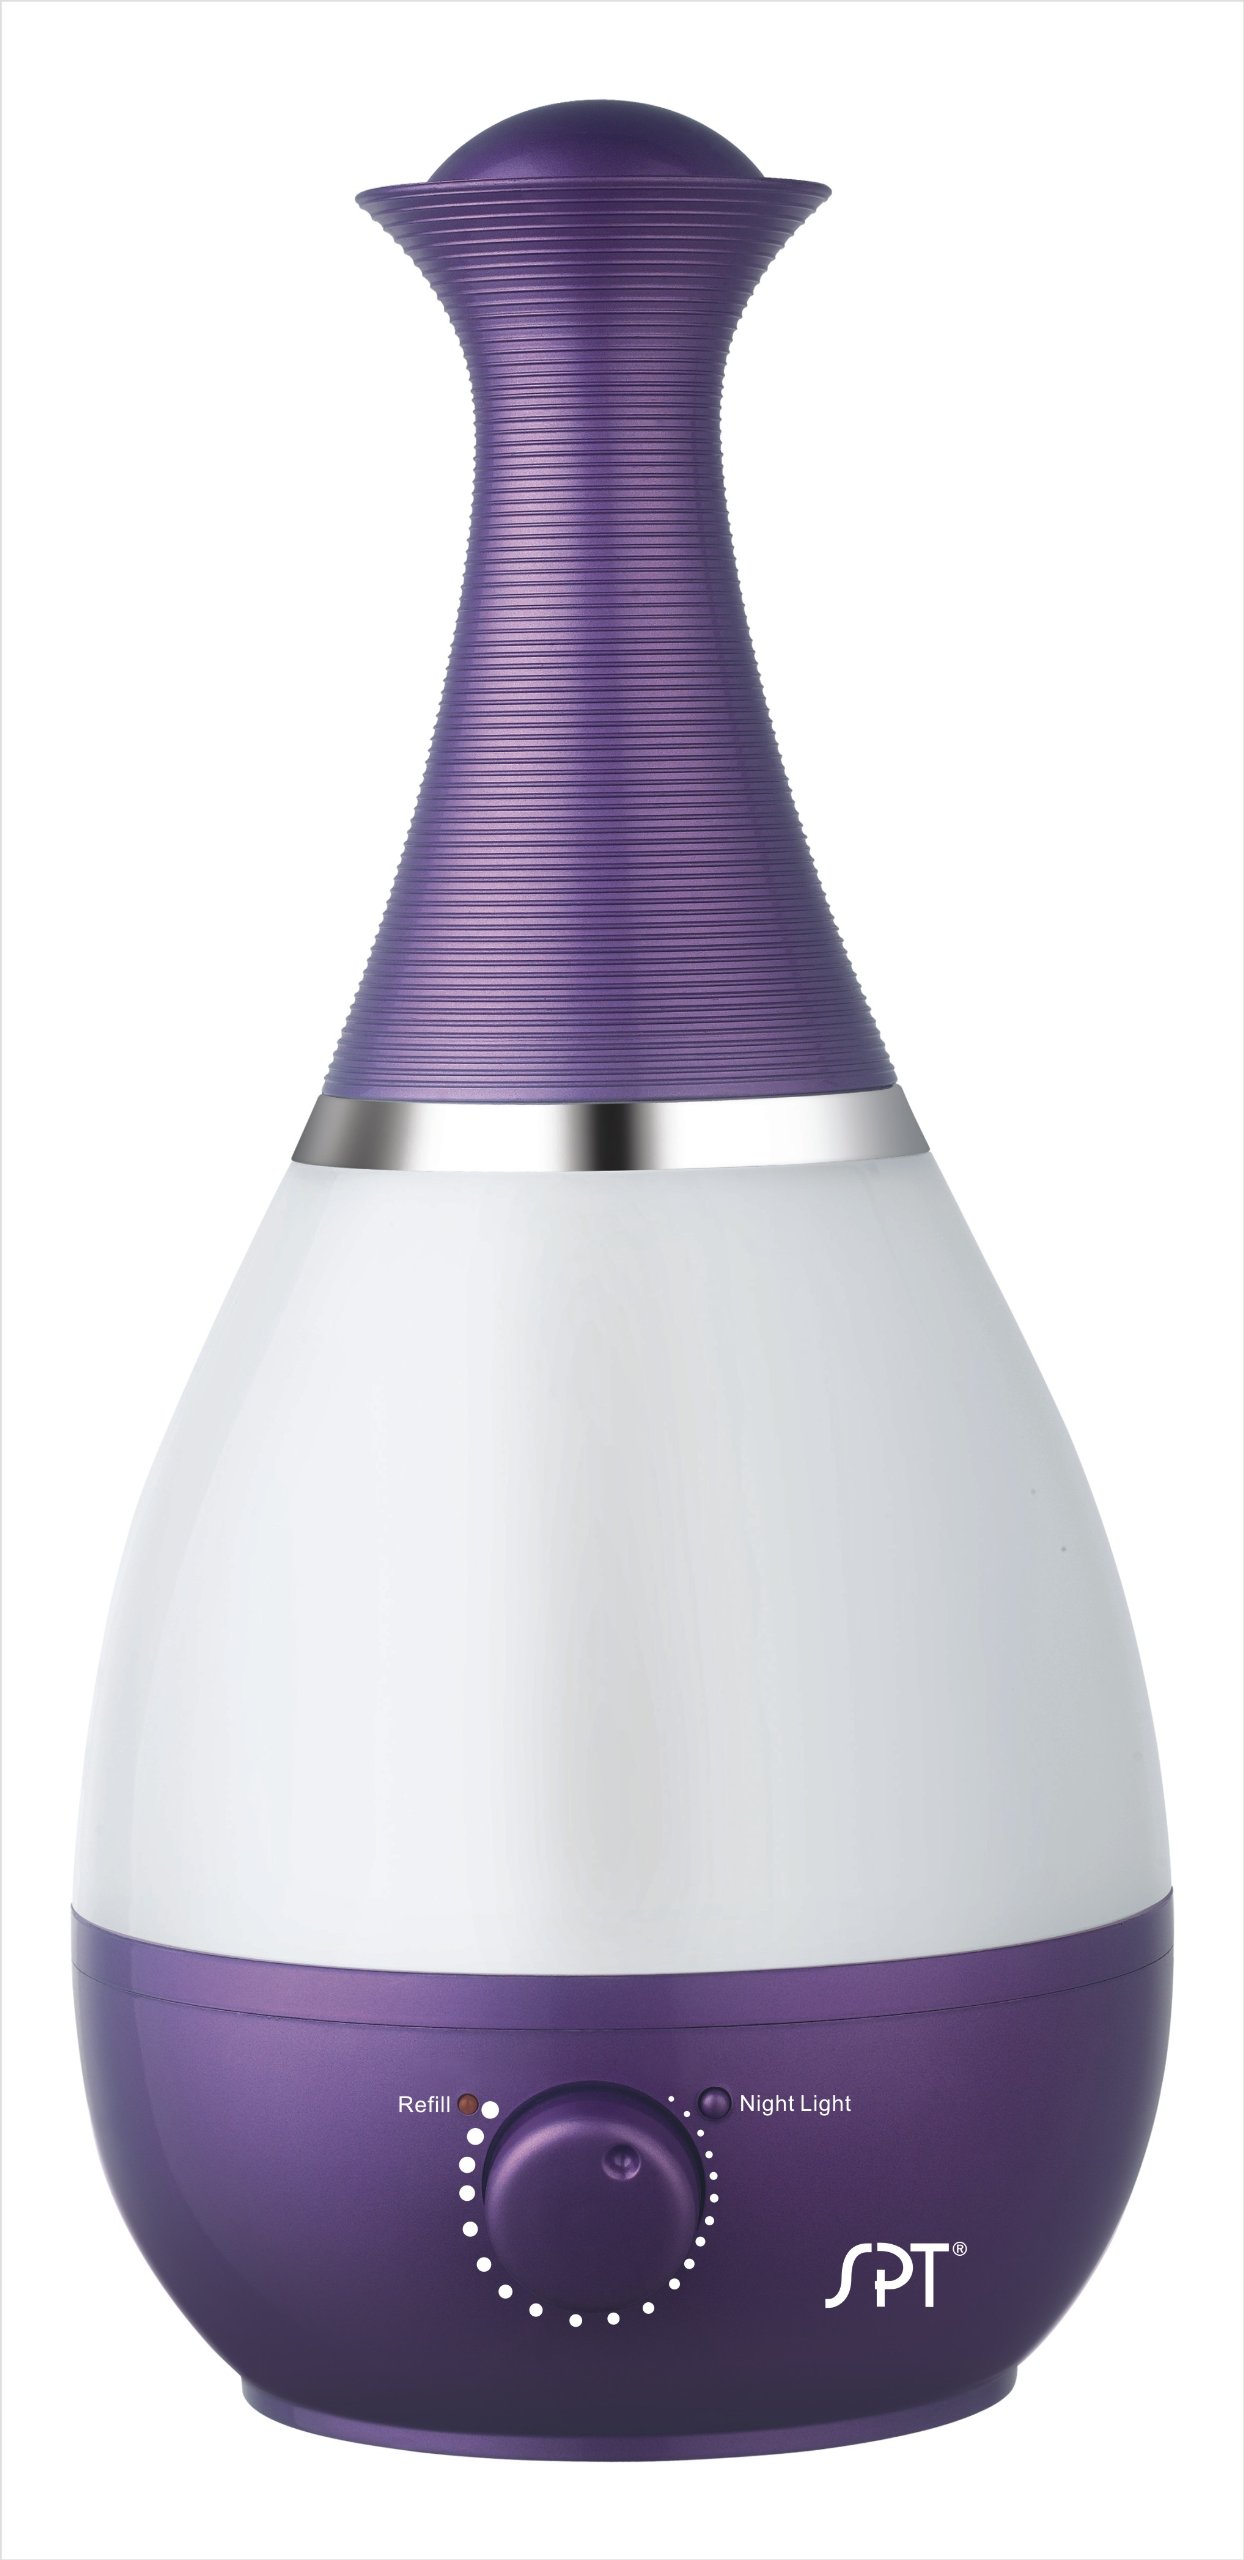 SPT Ultrasonic Humidifier with Frangrance Diffuser and Night Light (Violet)